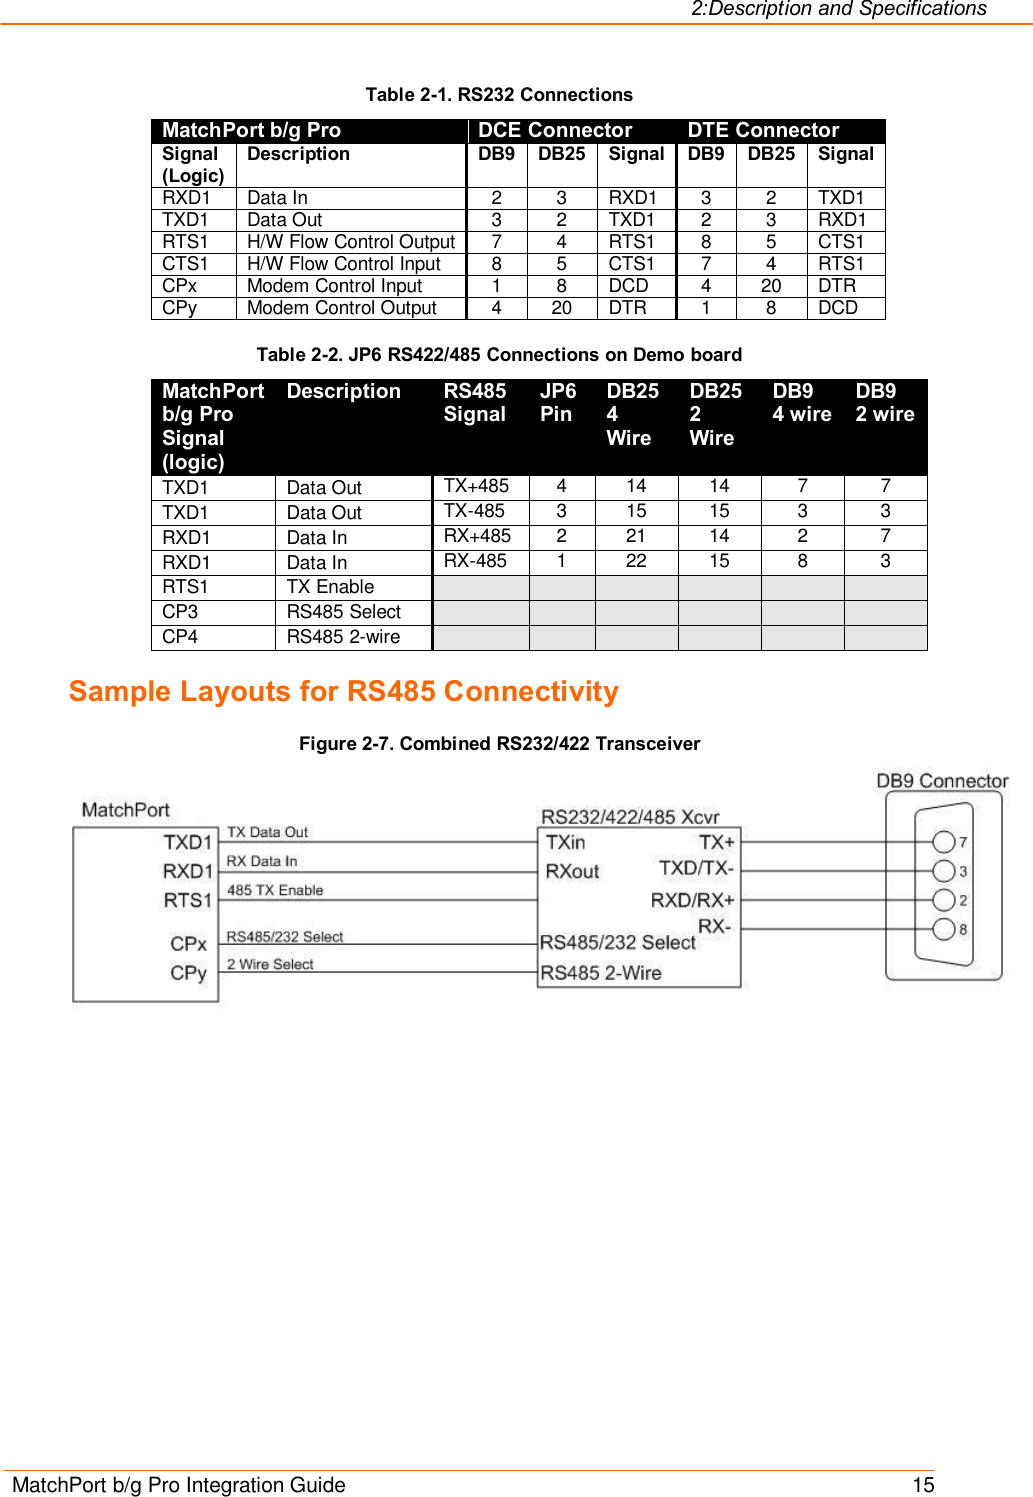 2:Description and Specifications MatchPort b/g Pro Integration Guide    15 Table 2-1. RS232 Connections MatchPort b/g Pro DCE Connector DTE Connector Signal (Logic) Description   DB9 DB25 Signal DB9 DB25 Signal RXD1  Data In  2  3  RXD1  3  2  TXD1 TXD1  Data Out  3  2  TXD1  2  3  RXD1 RTS1  H/W Flow Control Output 7  4  RTS1  8  5  CTS1 CTS1  H/W Flow Control Input  8  5  CTS1  7  4  RTS1 CPx  Modem Control Input  1  8  DCD  4  20  DTR CPy  Modem Control Output   4  20  DTR  1  8  DCD Table 2-2. JP6 RS422/485 Connections on Demo board MatchPort b/g Pro Signal (logic) Description   RS485 Signal JP6 Pin DB25 4 Wire DB25 2 Wire DB9  4 wire DB9  2 wire TXD1  Data Out  TX+485  4  14  14  7  7 TXD1  Data Out  TX-485  3  15  15  3  3 RXD1  Data In  RX+485  2  21  14  2  7 RXD1  Data In  RX-485  1  22  15  8  3 RTS1  TX Enable             CP3  RS485 Select             CP4  RS485 2-wire             Sample Layouts for RS485 Connectivity Figure 2-7. Combined RS232/422 Transceiver   